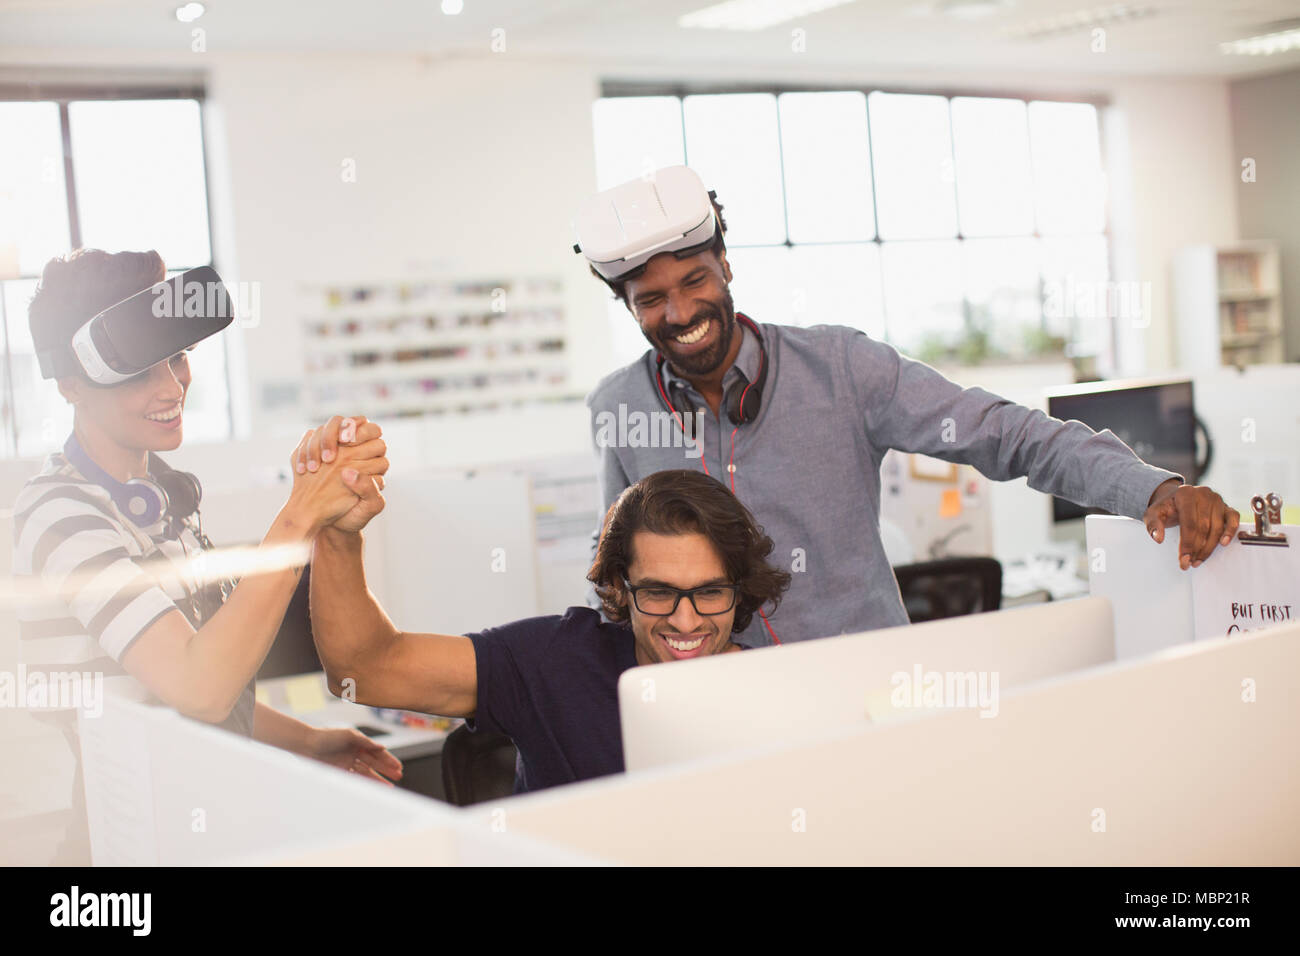 Smiling, enthusiastic computer programmers high-fiving, testing virtual reality simulator glasses Stock Photo